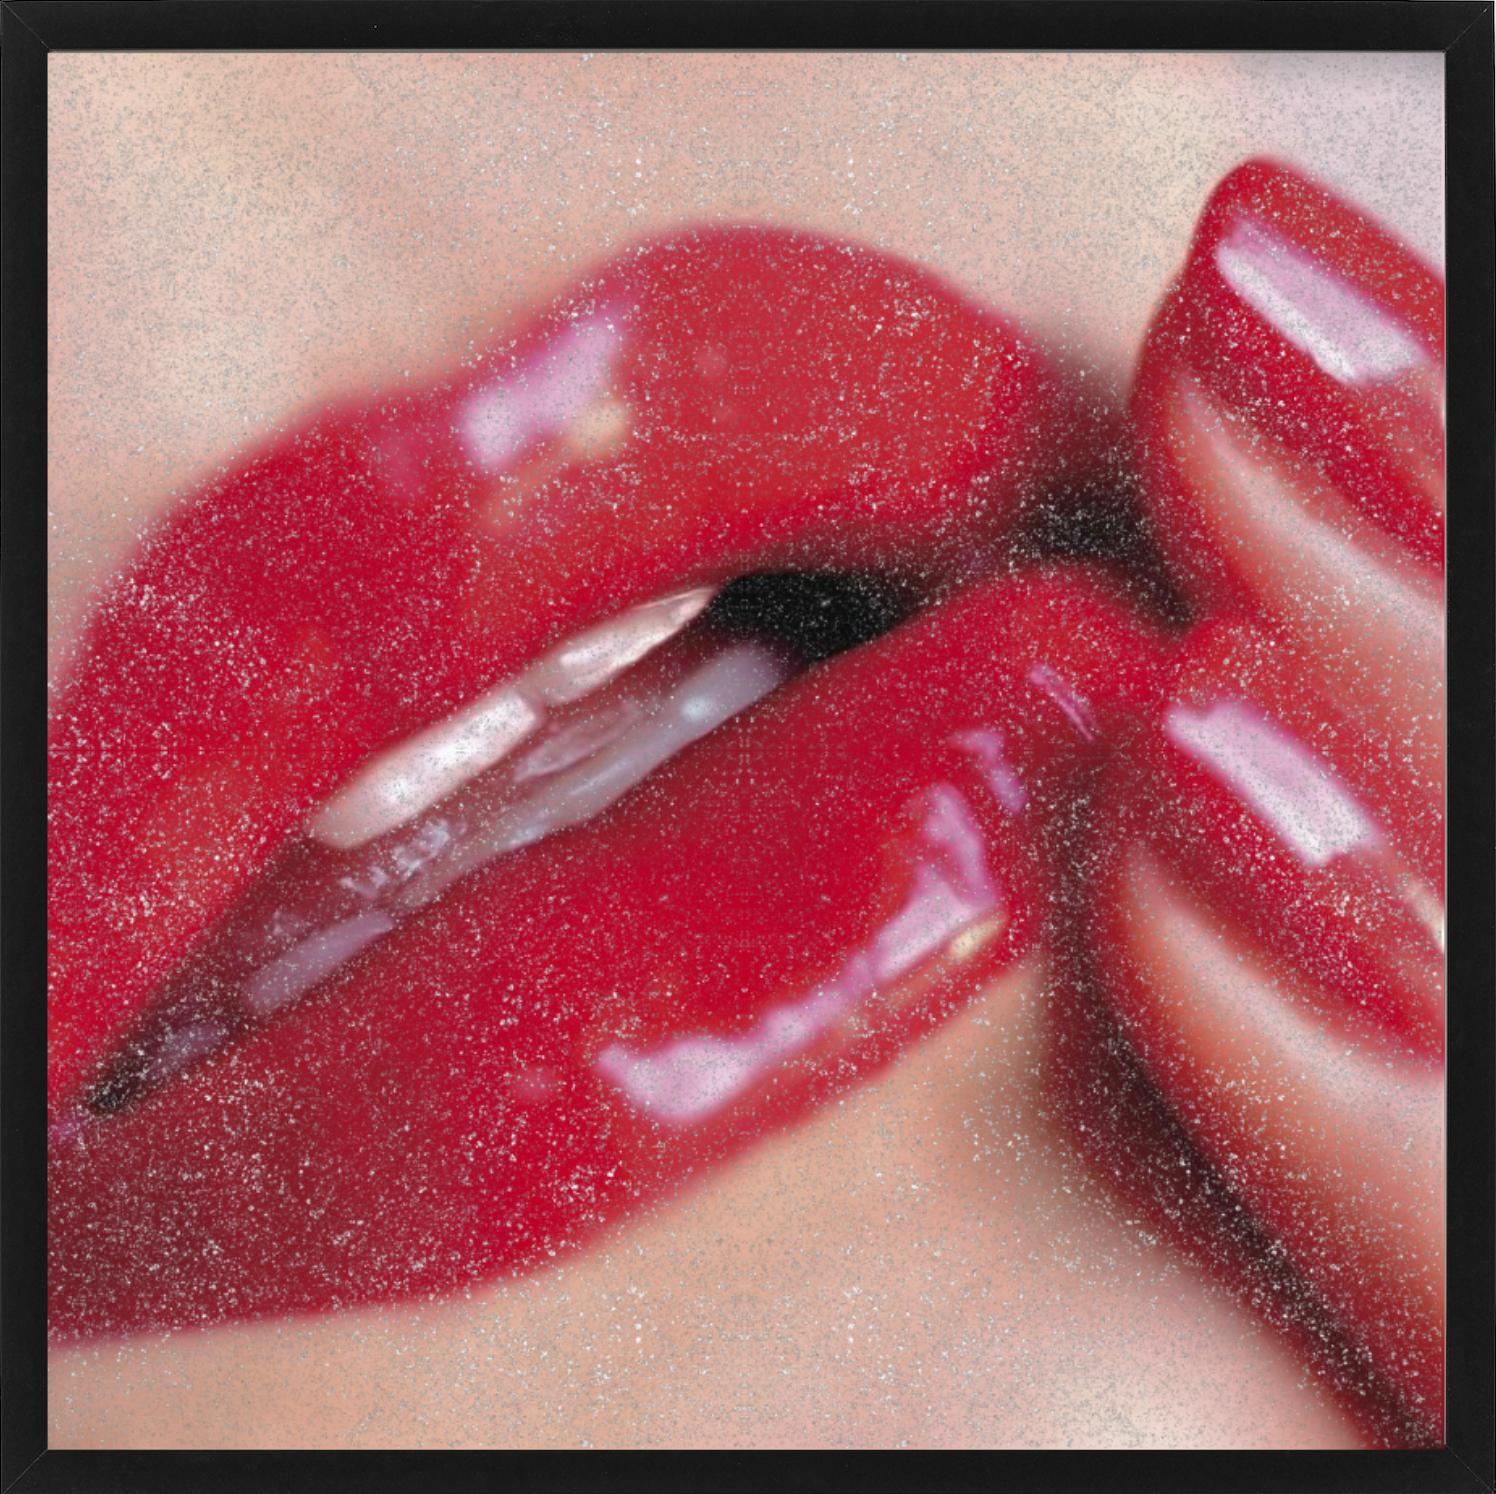 Open to Love Diamond Dust - Close-up of red lips and fingers covered in sparkles - Contemporary Photograph by Guido Argentini